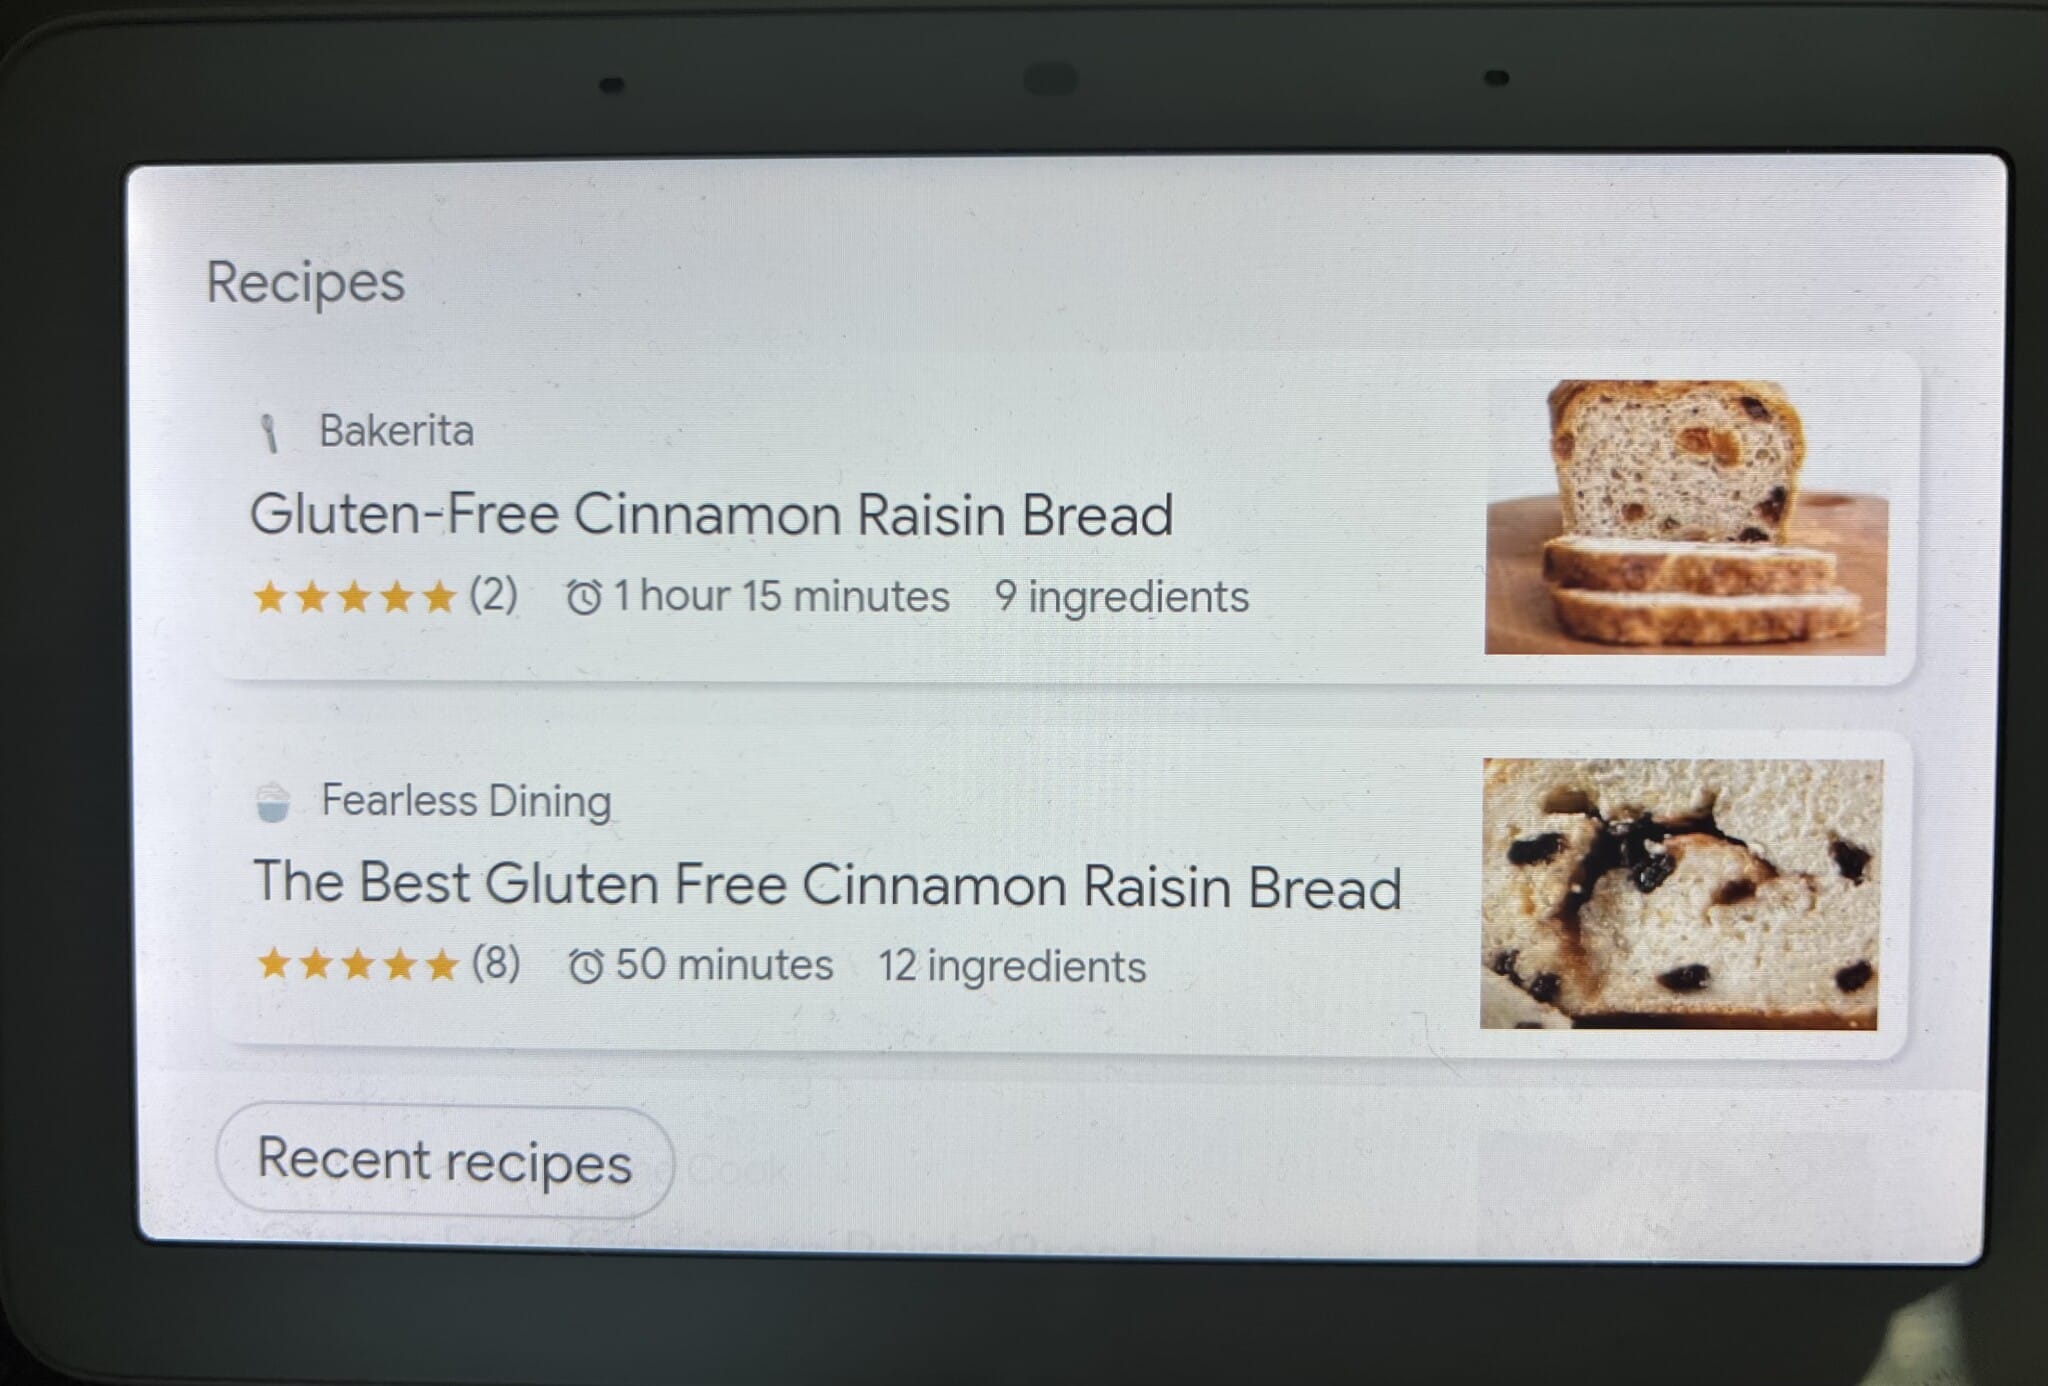 Google Hub results display for Hey Google, what is a five-star rated gluten-free recipe for cinnamon raisin bread."